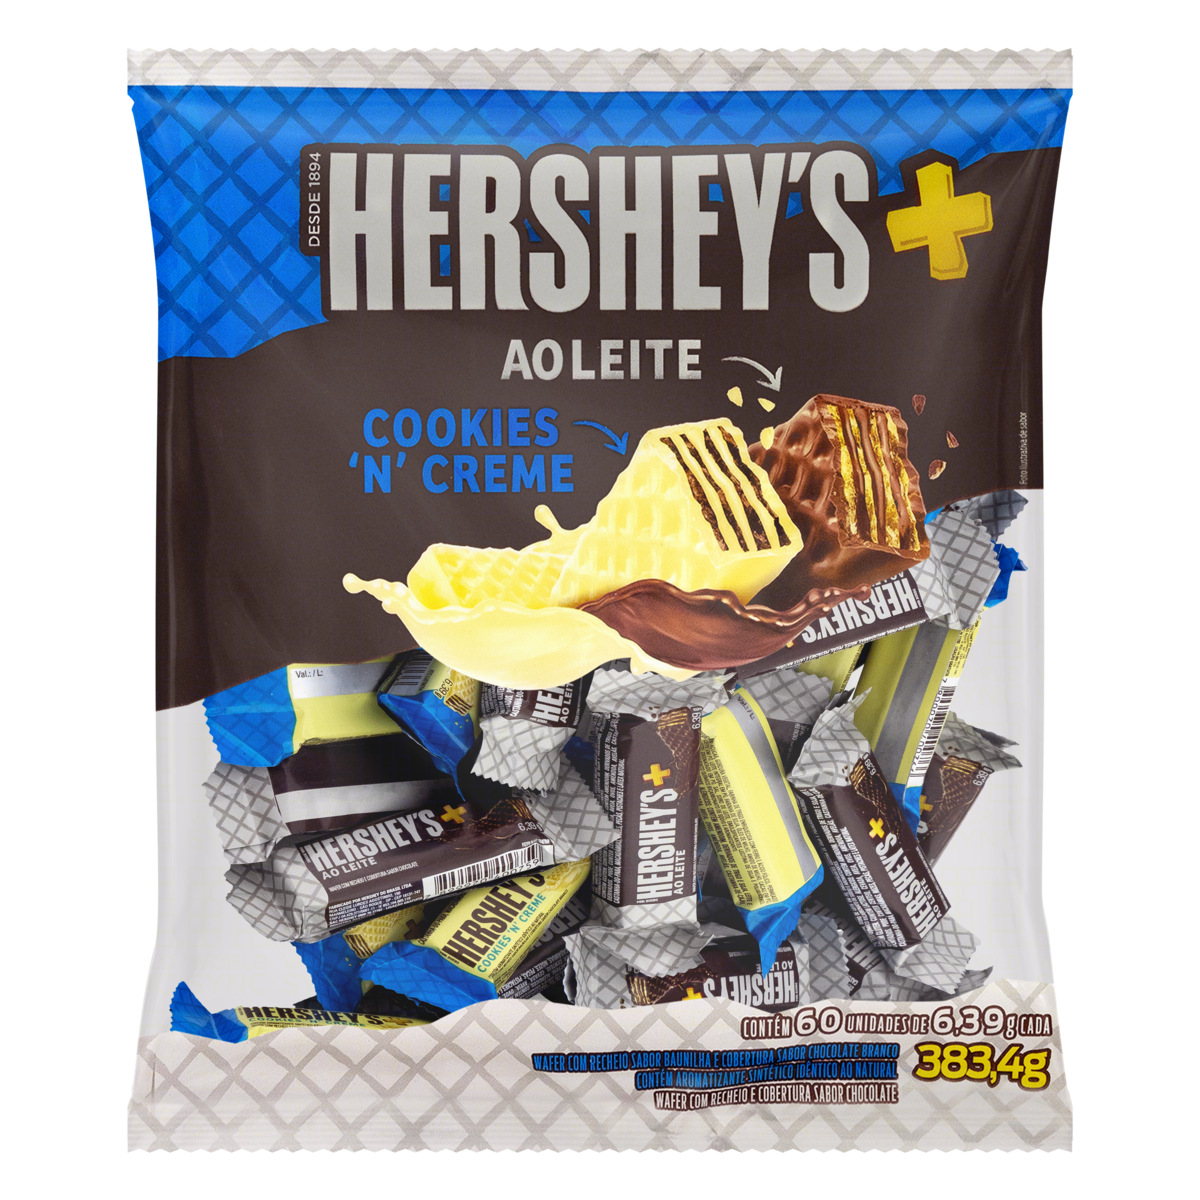 7899970401909 - PACK WAFER COOKIES N CREME + CHOCOLATE AO LEITE HERSHEYS MAIS PACOTE 383,4G 60 UNIDADES